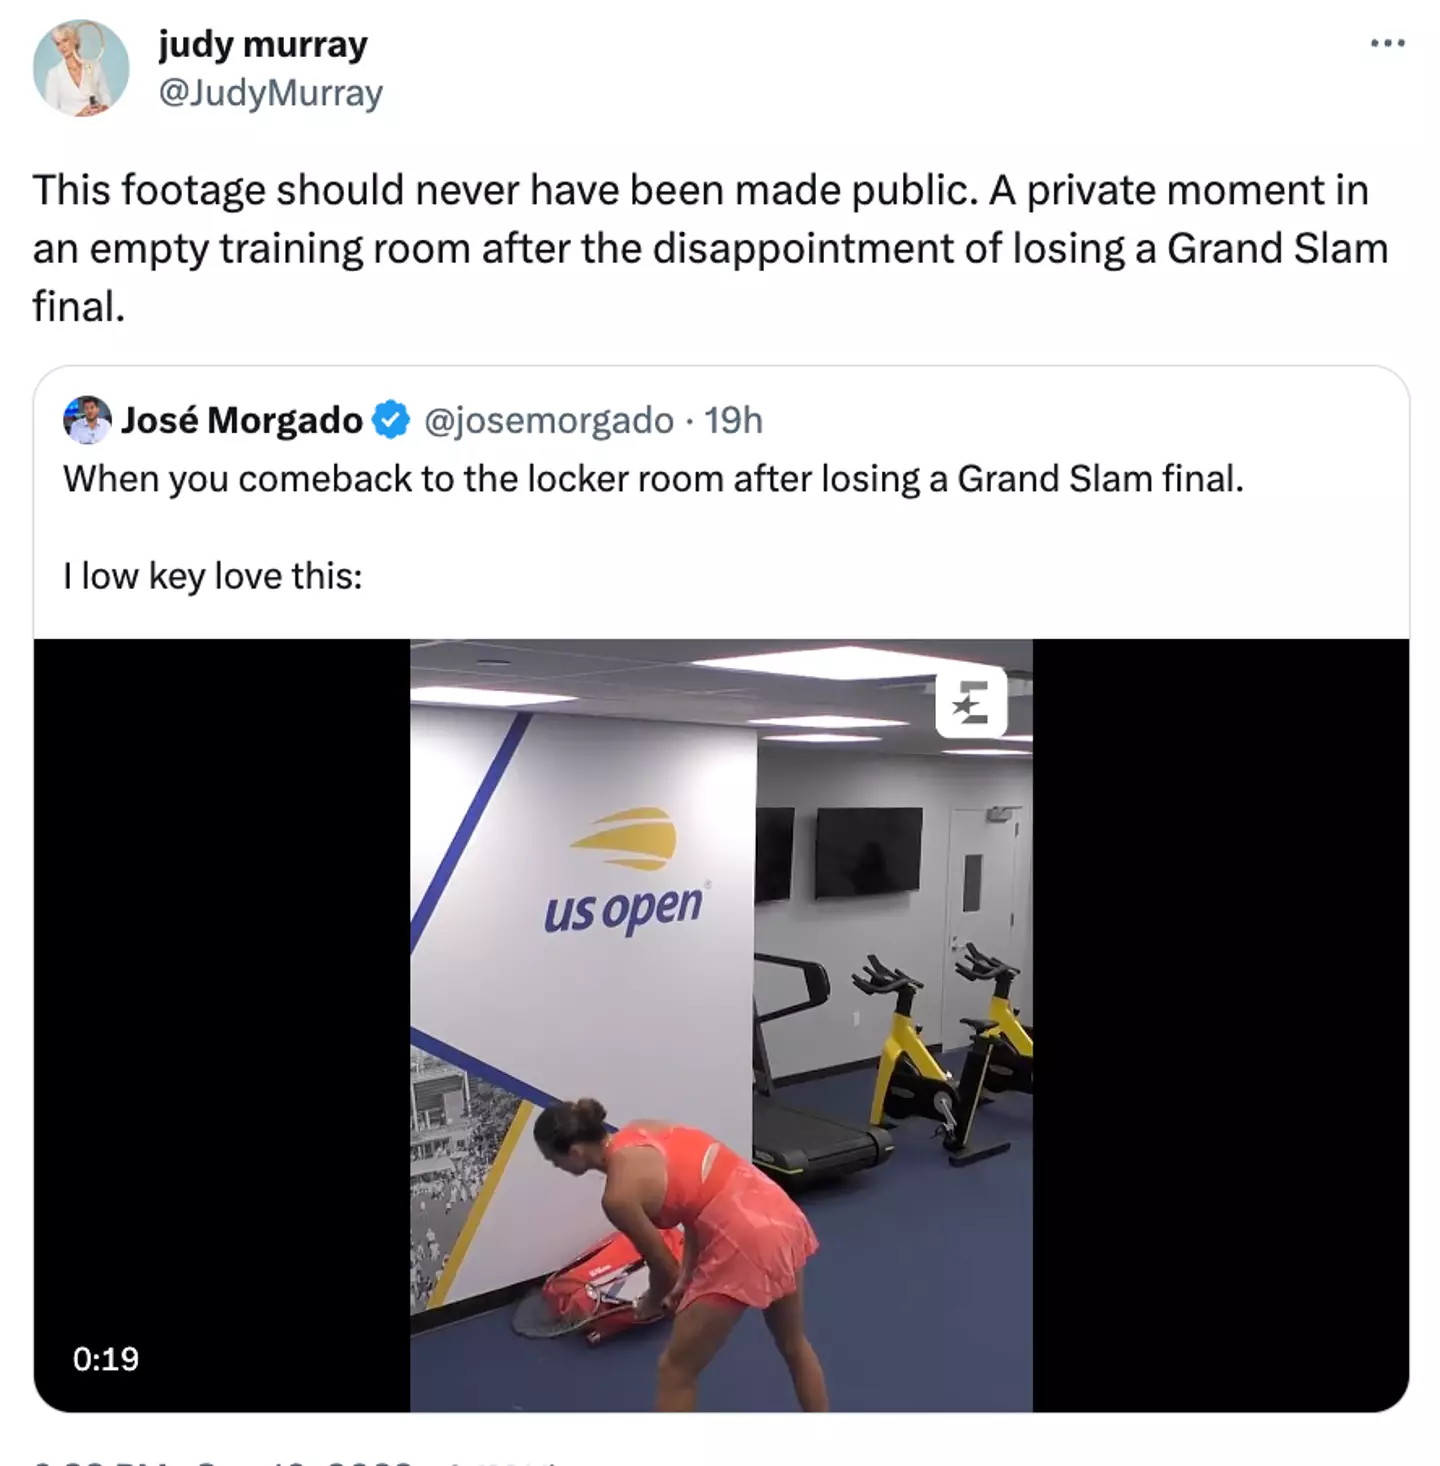 Judy Murray hit out at the decision to air the footage.